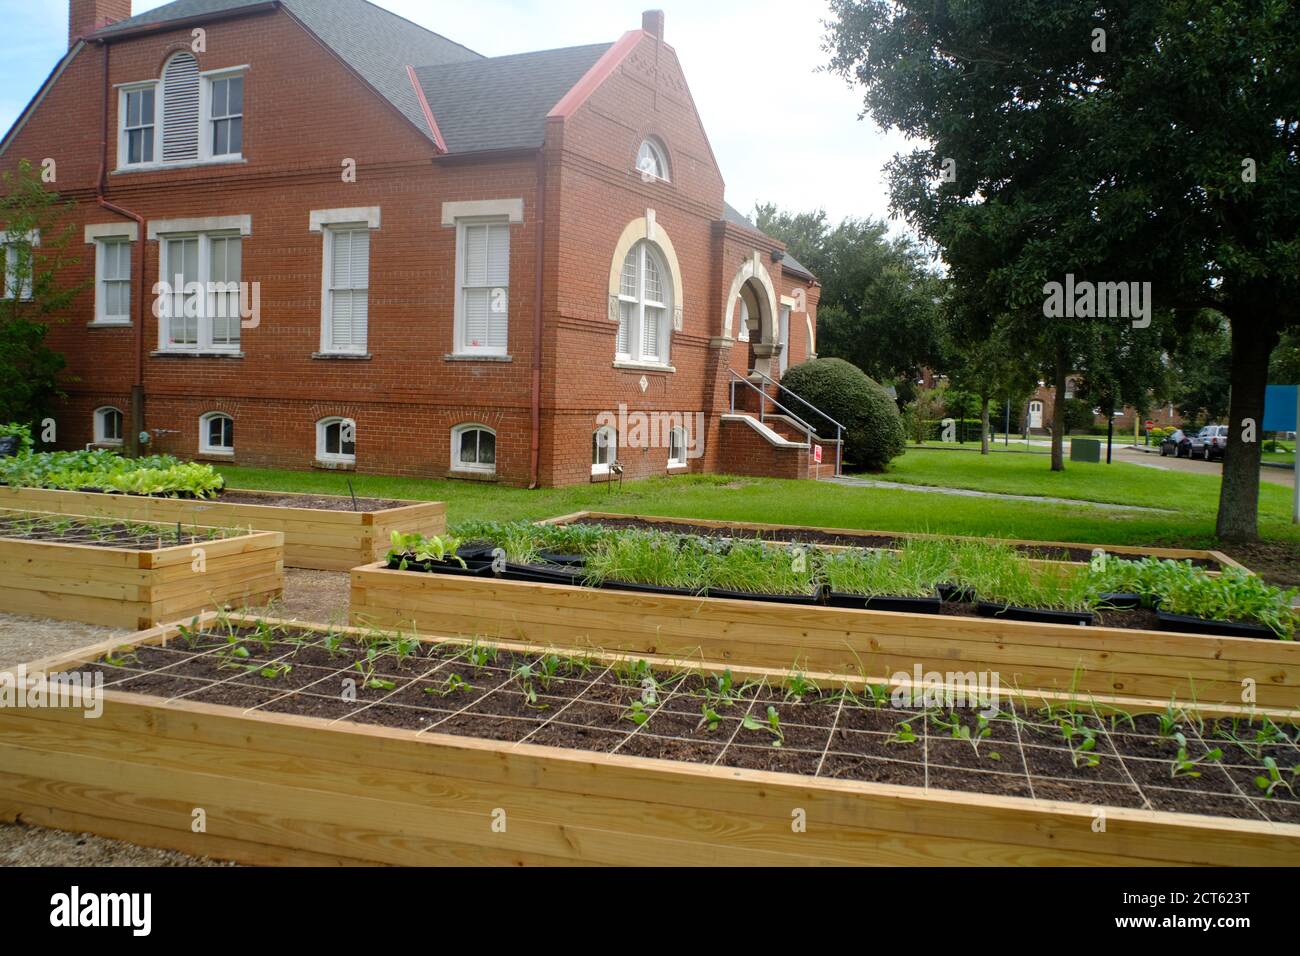 Constructing New Urban Garden on Site of 1850s English Village Built by 19th Century Furniture Maker, William Enston, Who Lived in Charleston, SC. Stock Photo